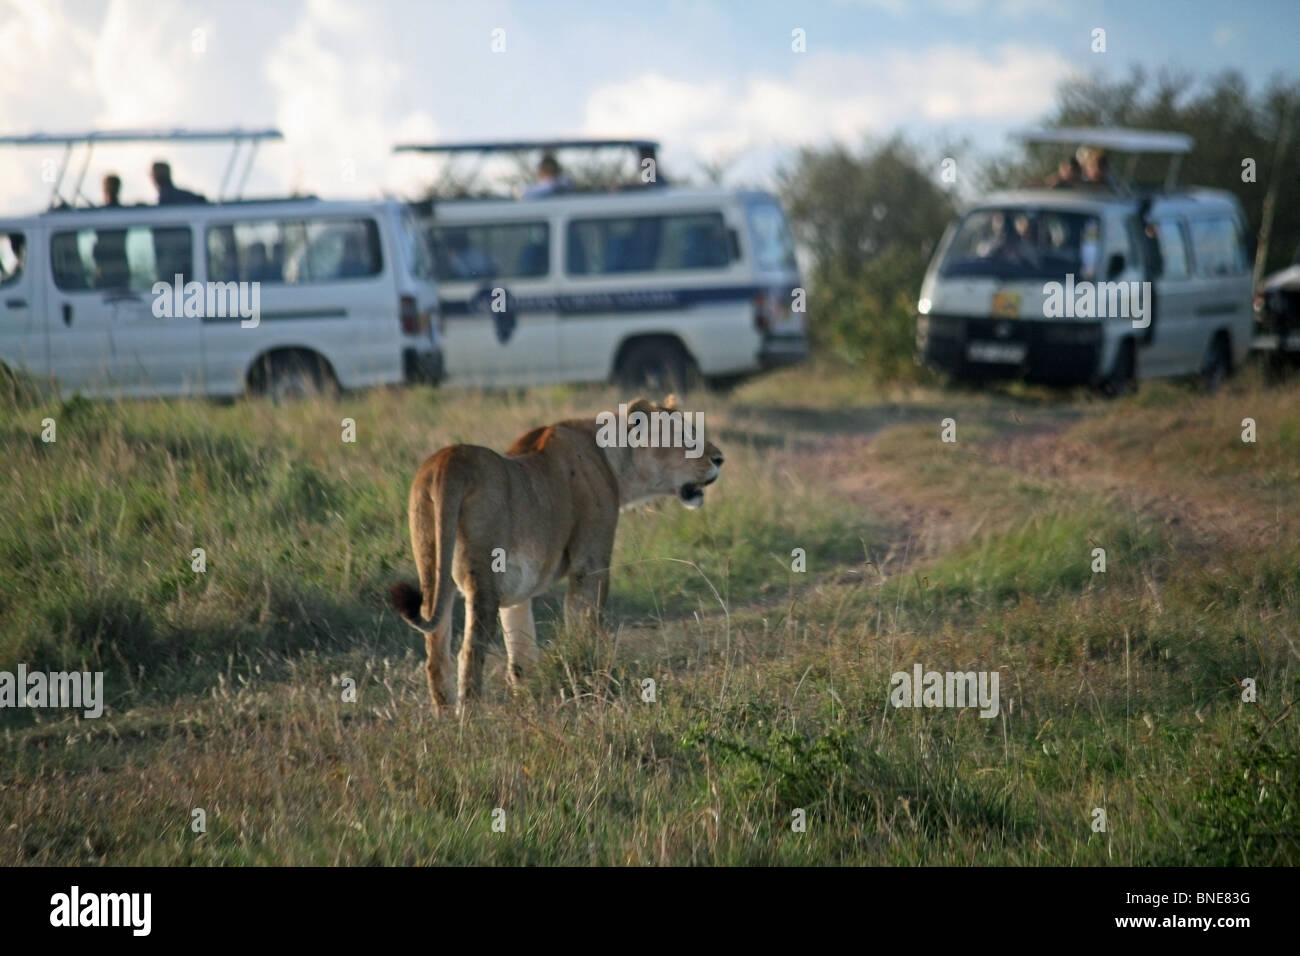 A lioness surrounded by Safari vehicles in Masai Mara National Reserve, Kenya, Africa Stock Photo